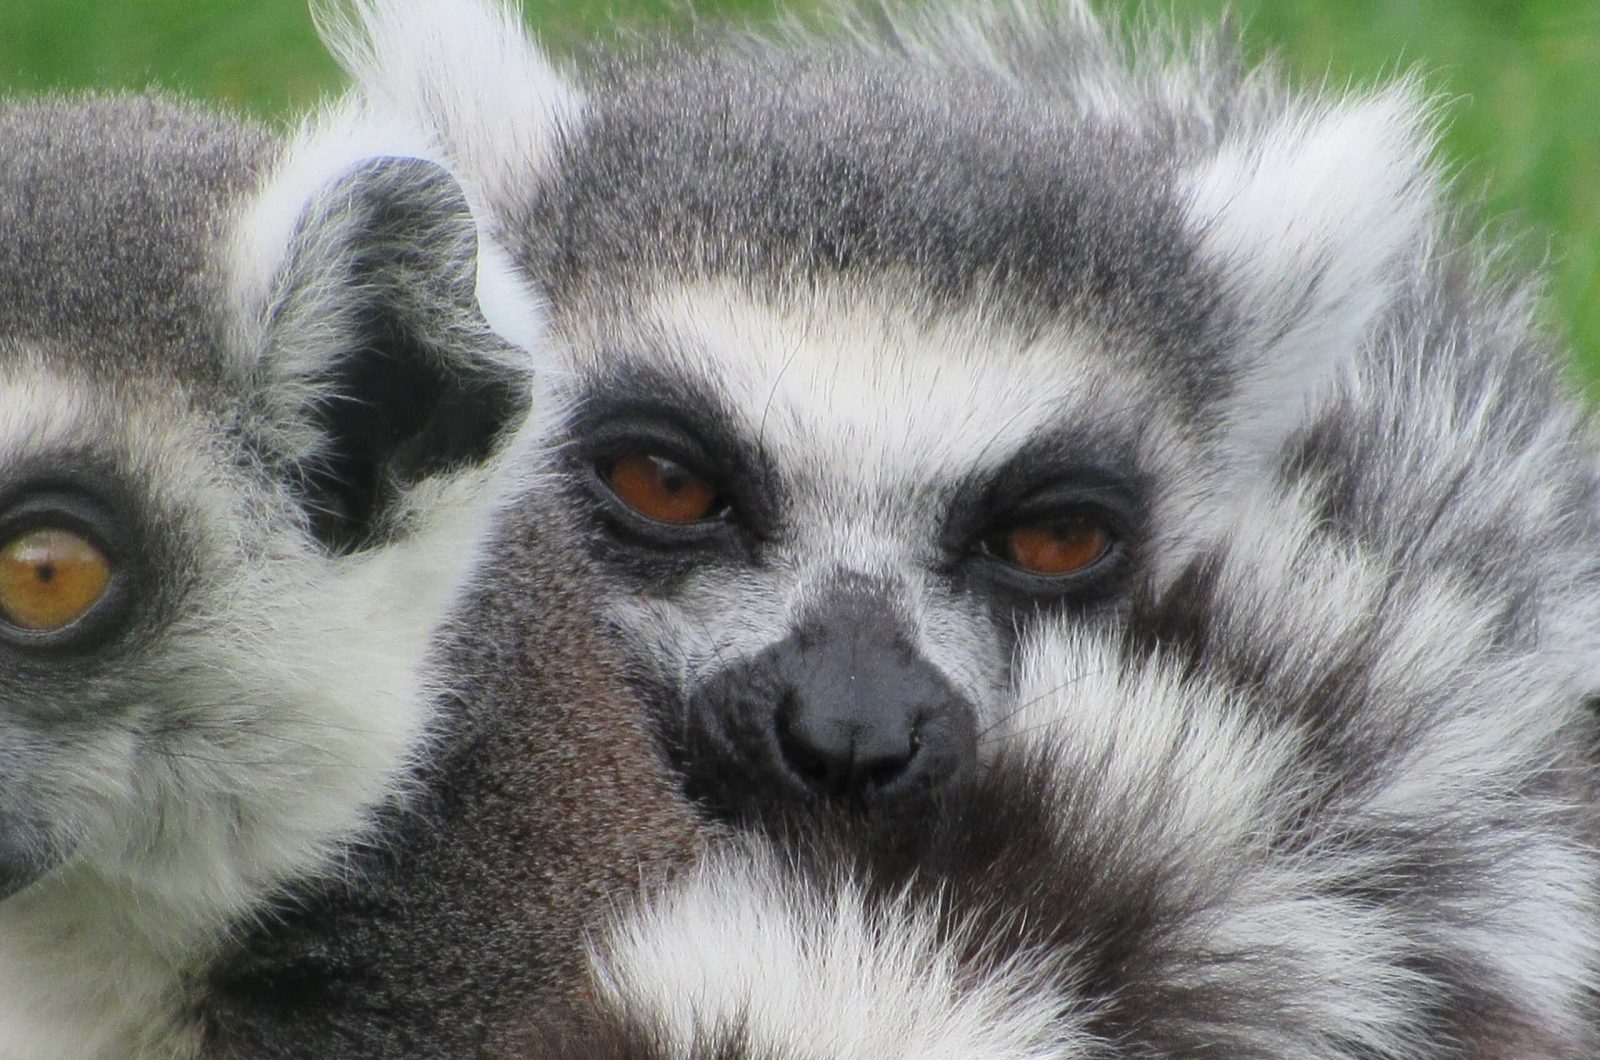 Two ring-tailed lemurs sat together